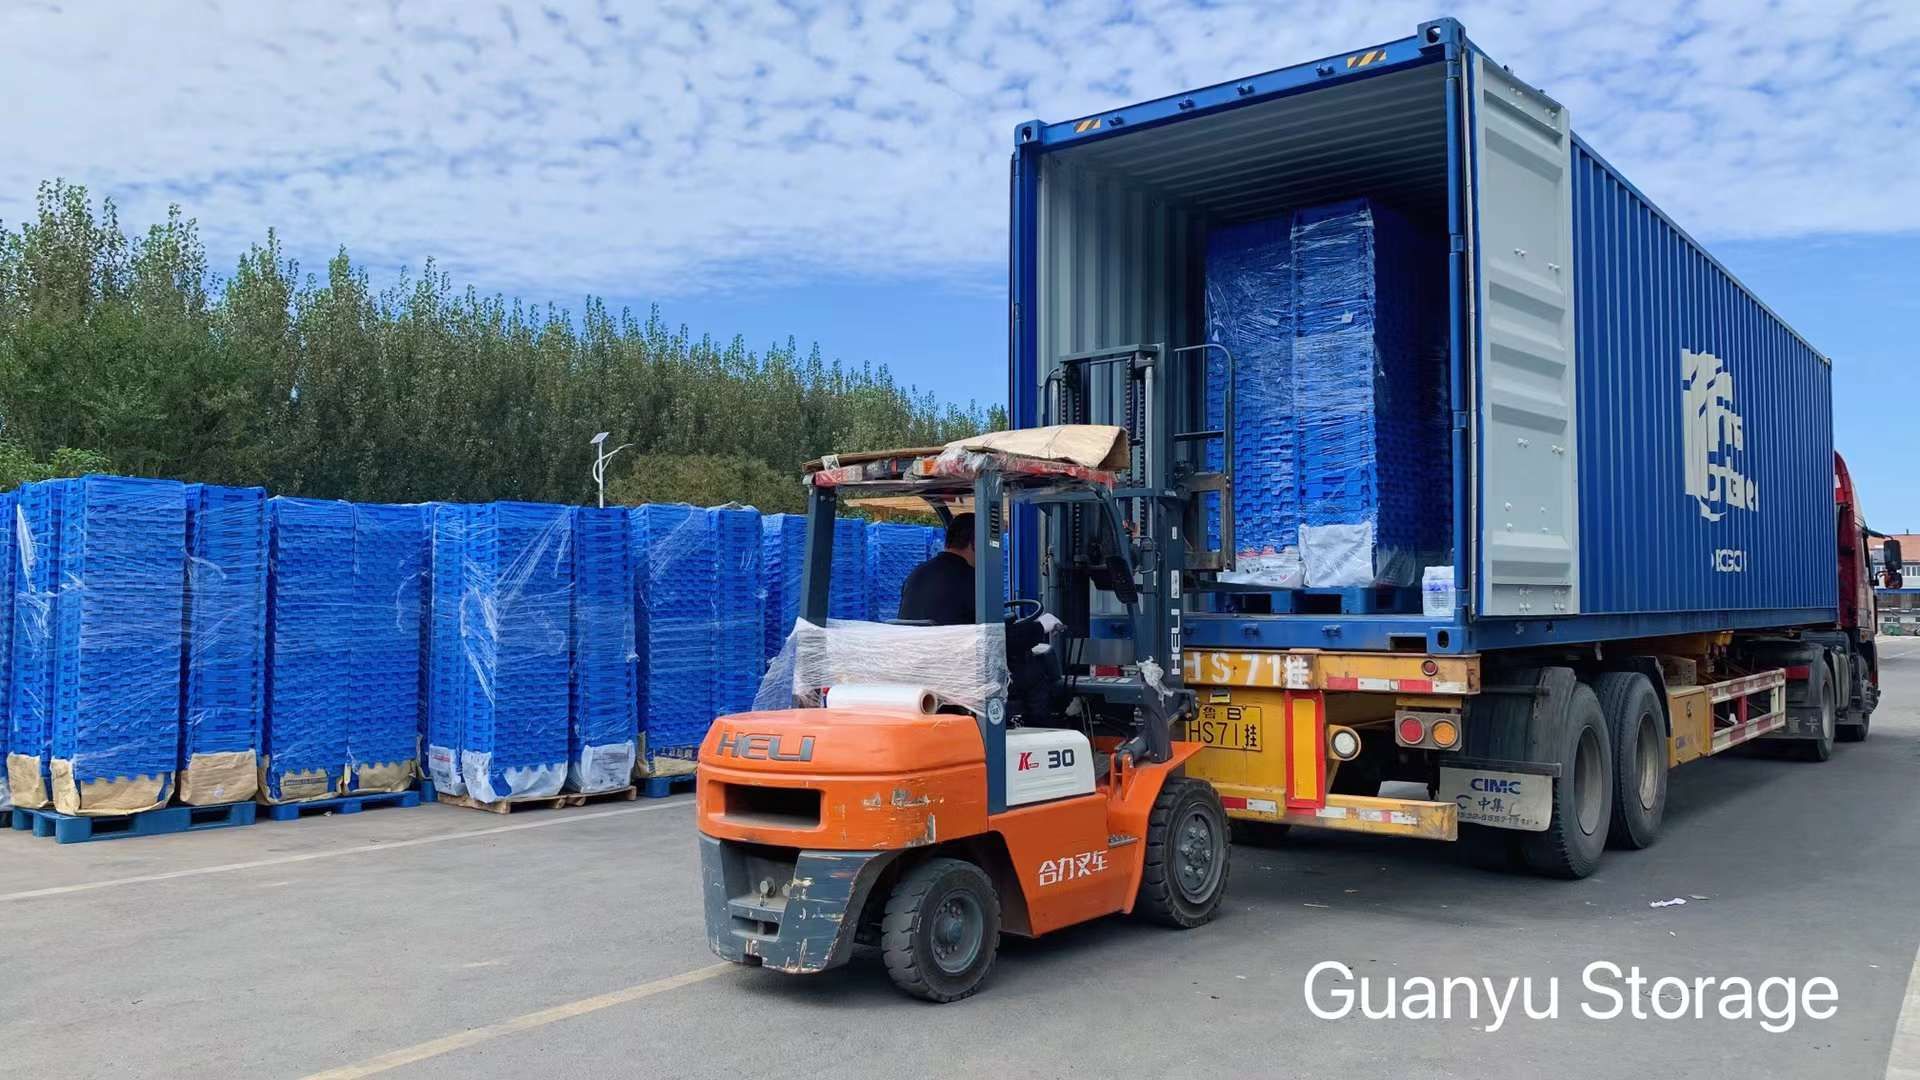 Industrial Storage Containers Large Plastic Totes Plastic Containers Plastic  Logistic Box - China Plastic Moving Box, Moving Container